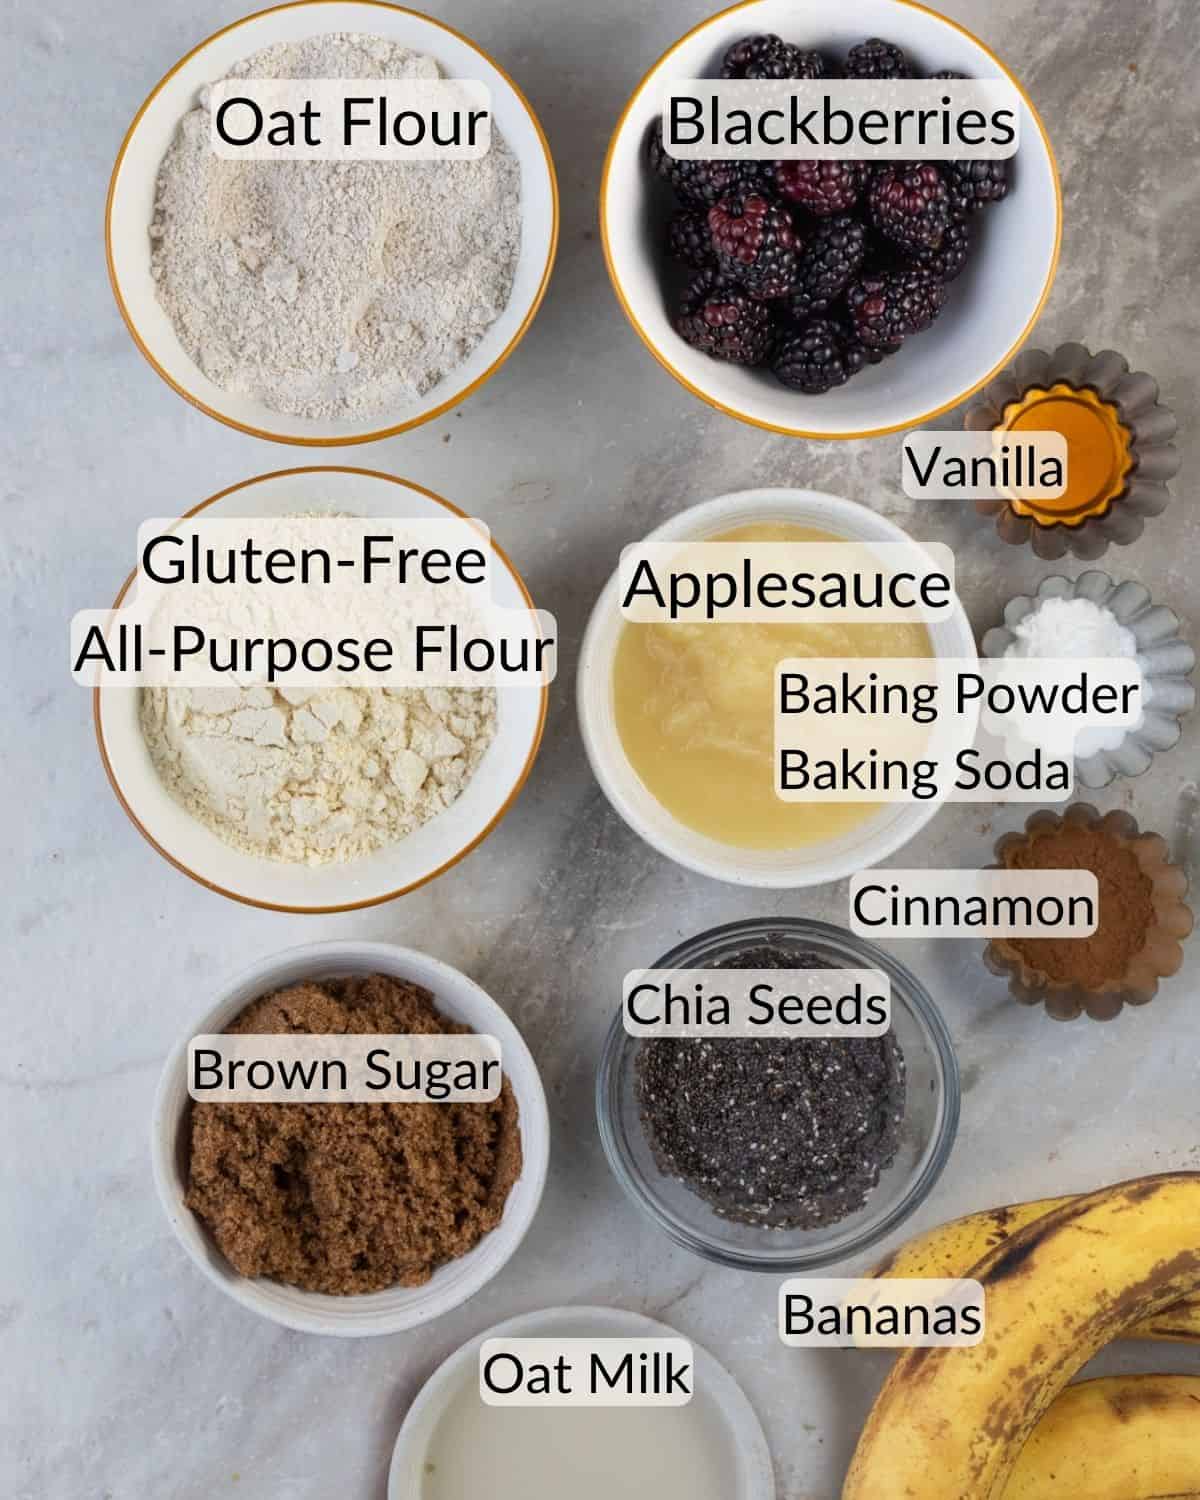 An assortment of baking ingredients neatly arranged on a marble countertop, labeled for preparing banana blackberry oatmeal muffins.